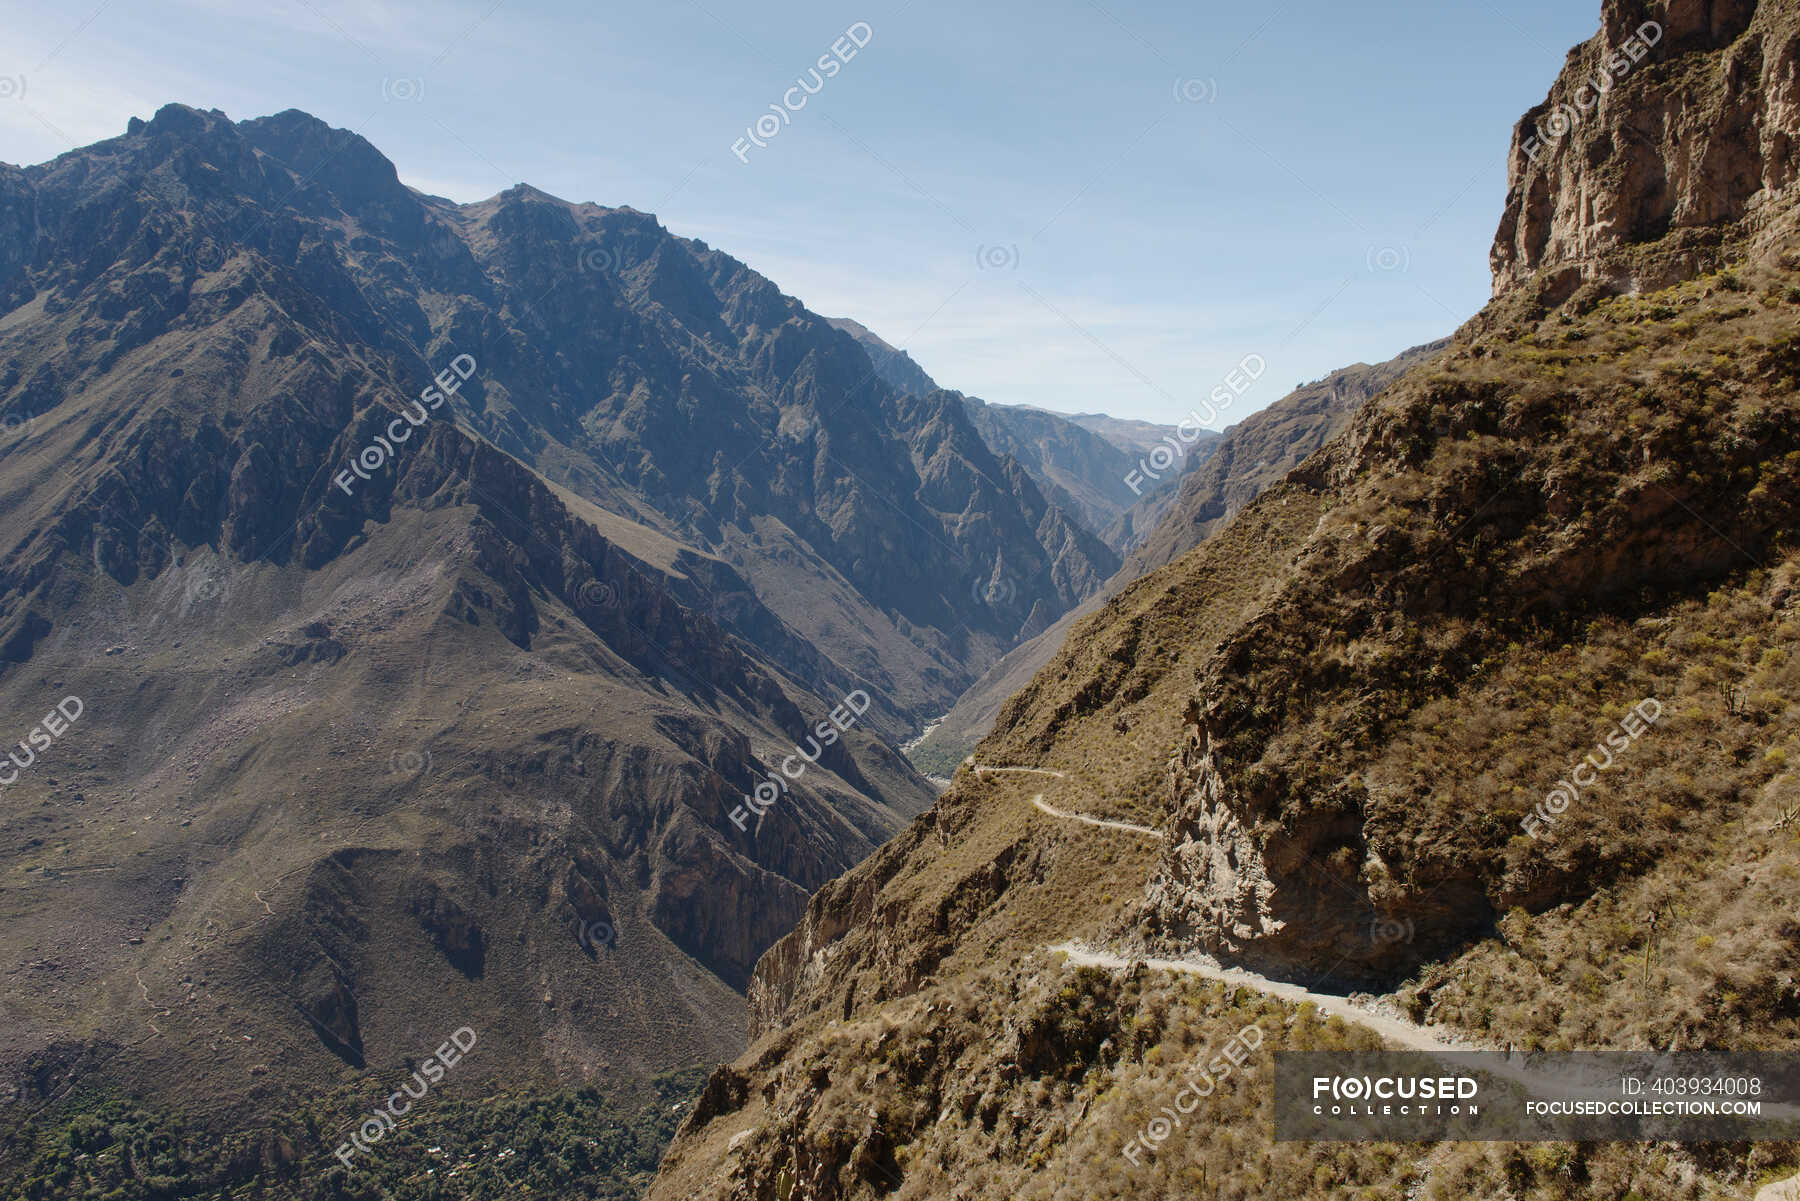 Cabanaconde Trail Stock Photos Royalty Free Images Focused